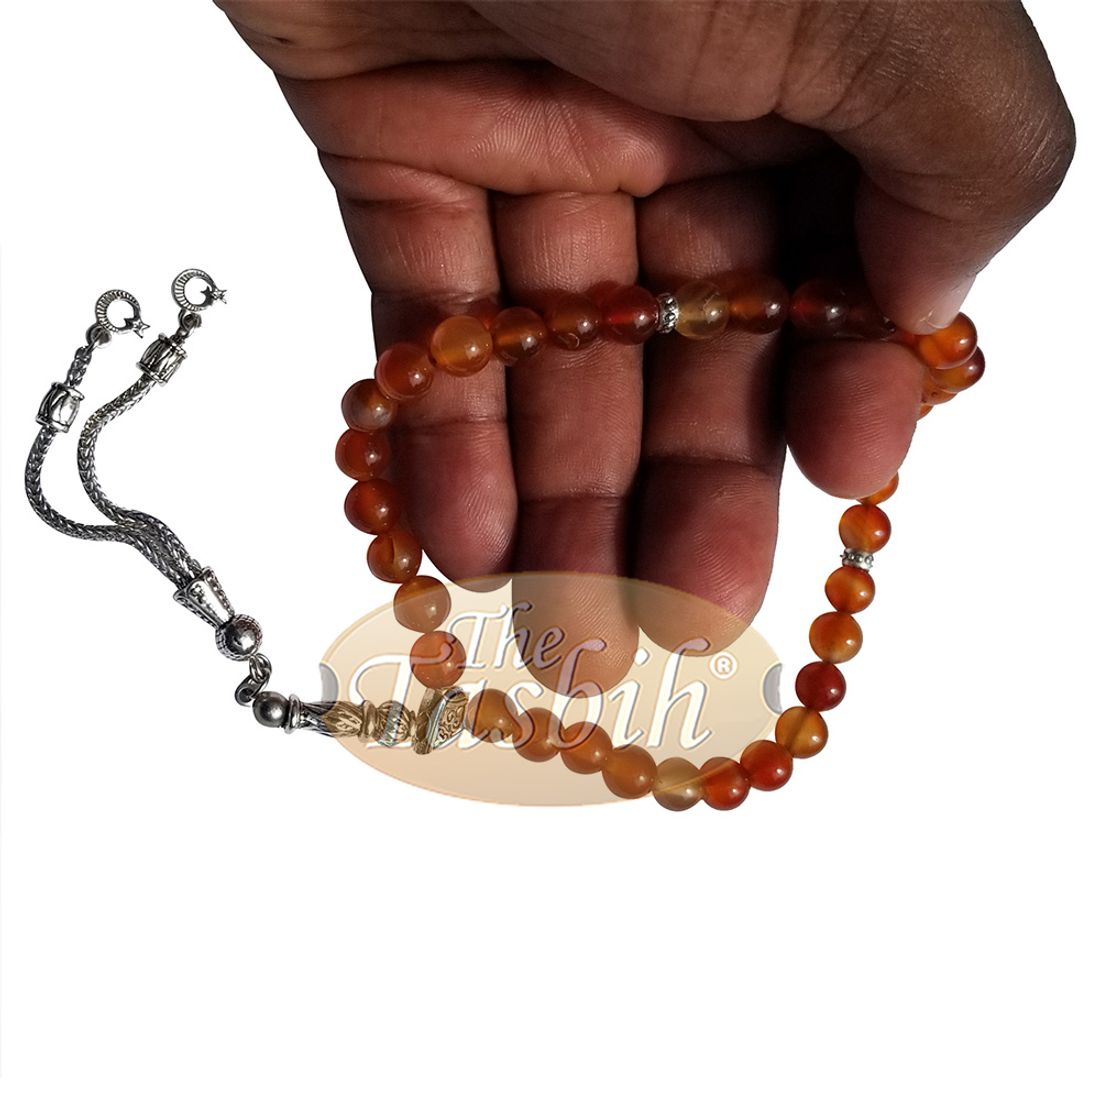 33-Bead Small Honey Agate 7mm Stone Tasbih Prayer Beads Silver Accents & Kizilay Charms